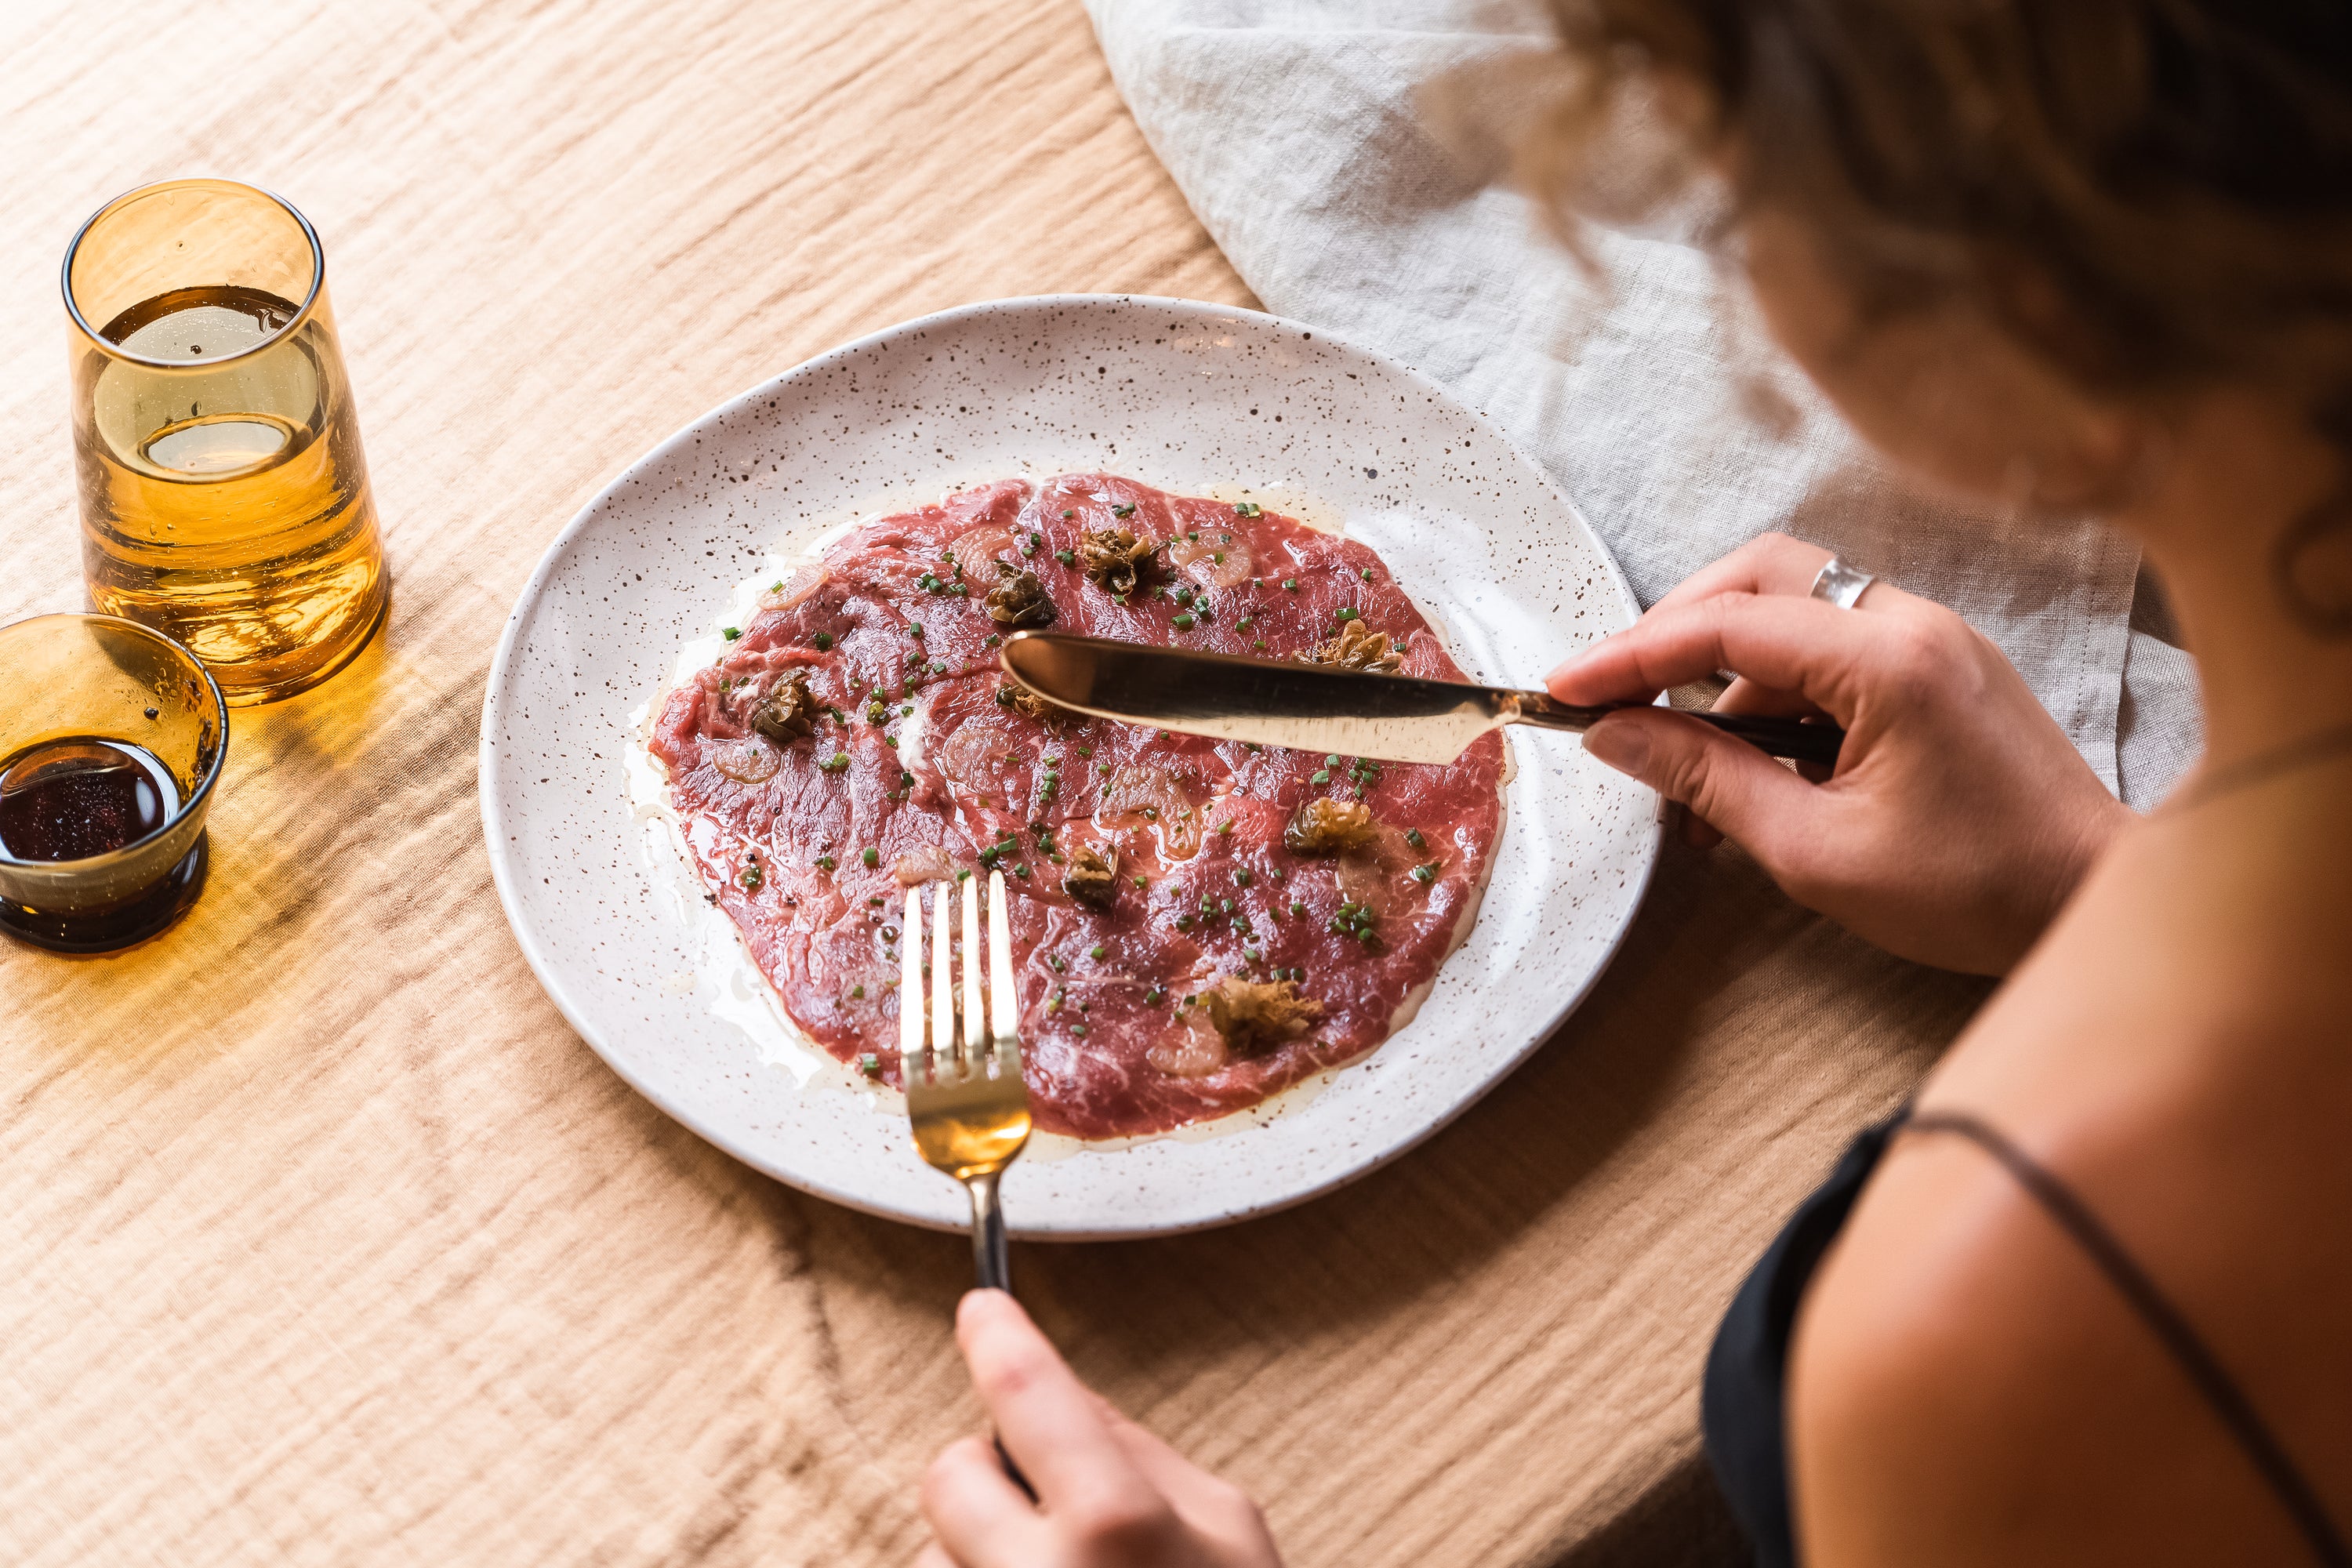 On Saardé's Shared Table: Beef Carpaccio with Anchovy Aioli & Fried Capers from Sagra Restaurant